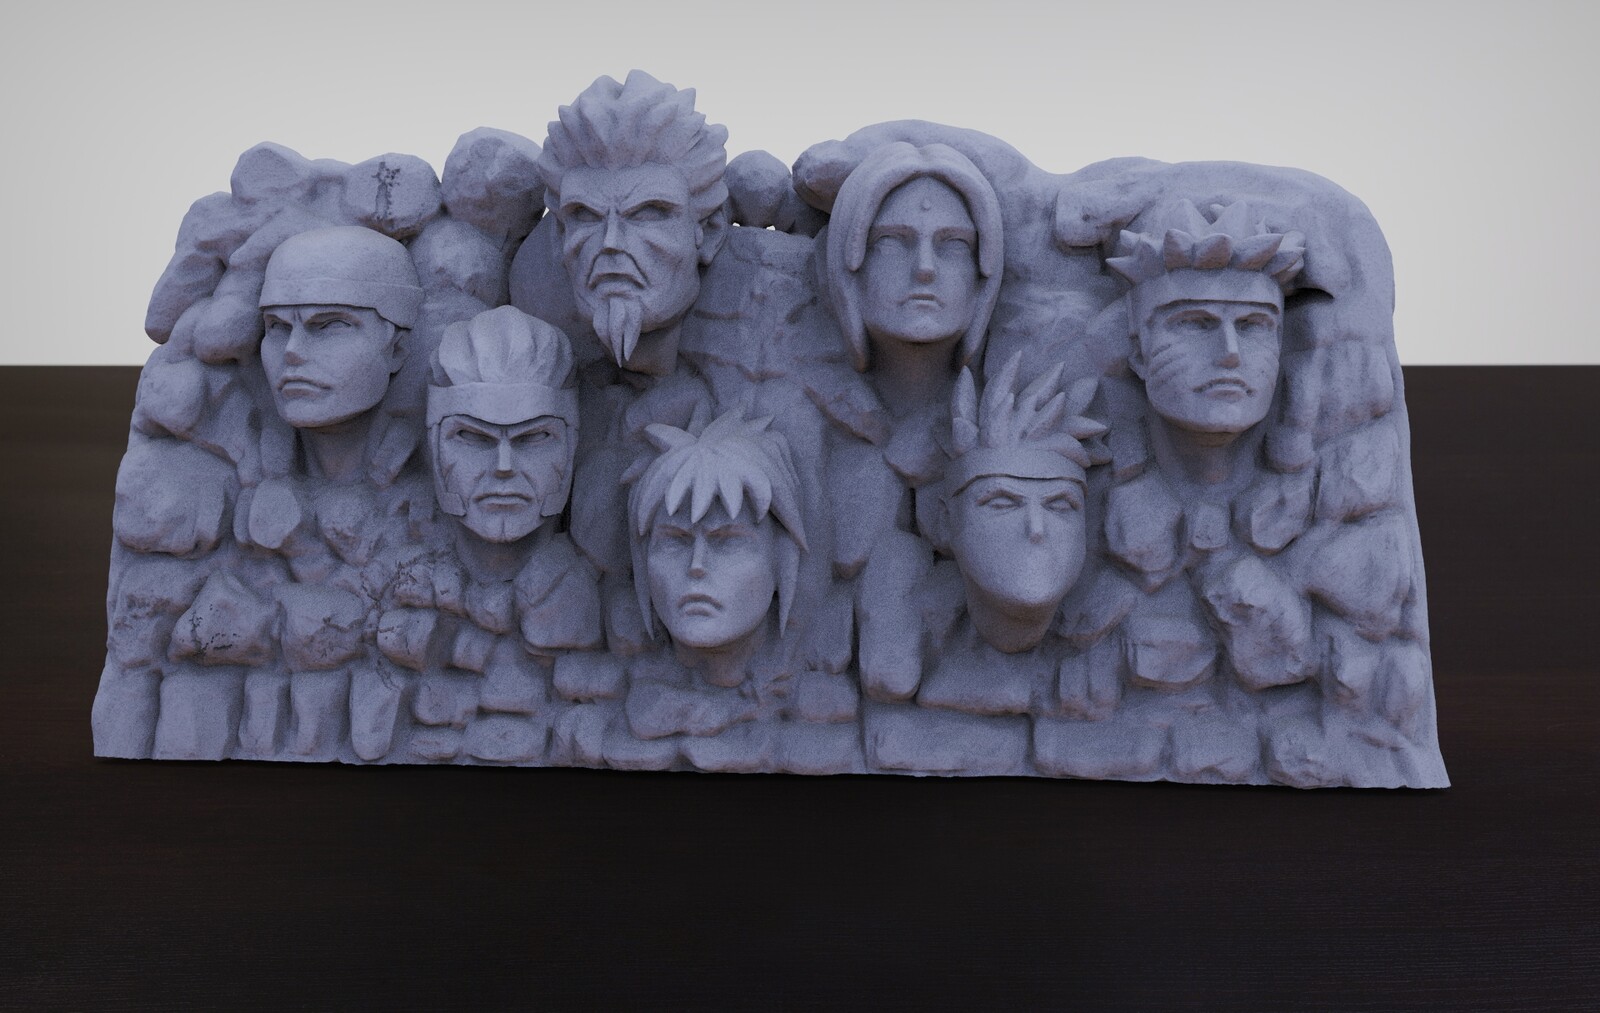 Mountain of the hokages